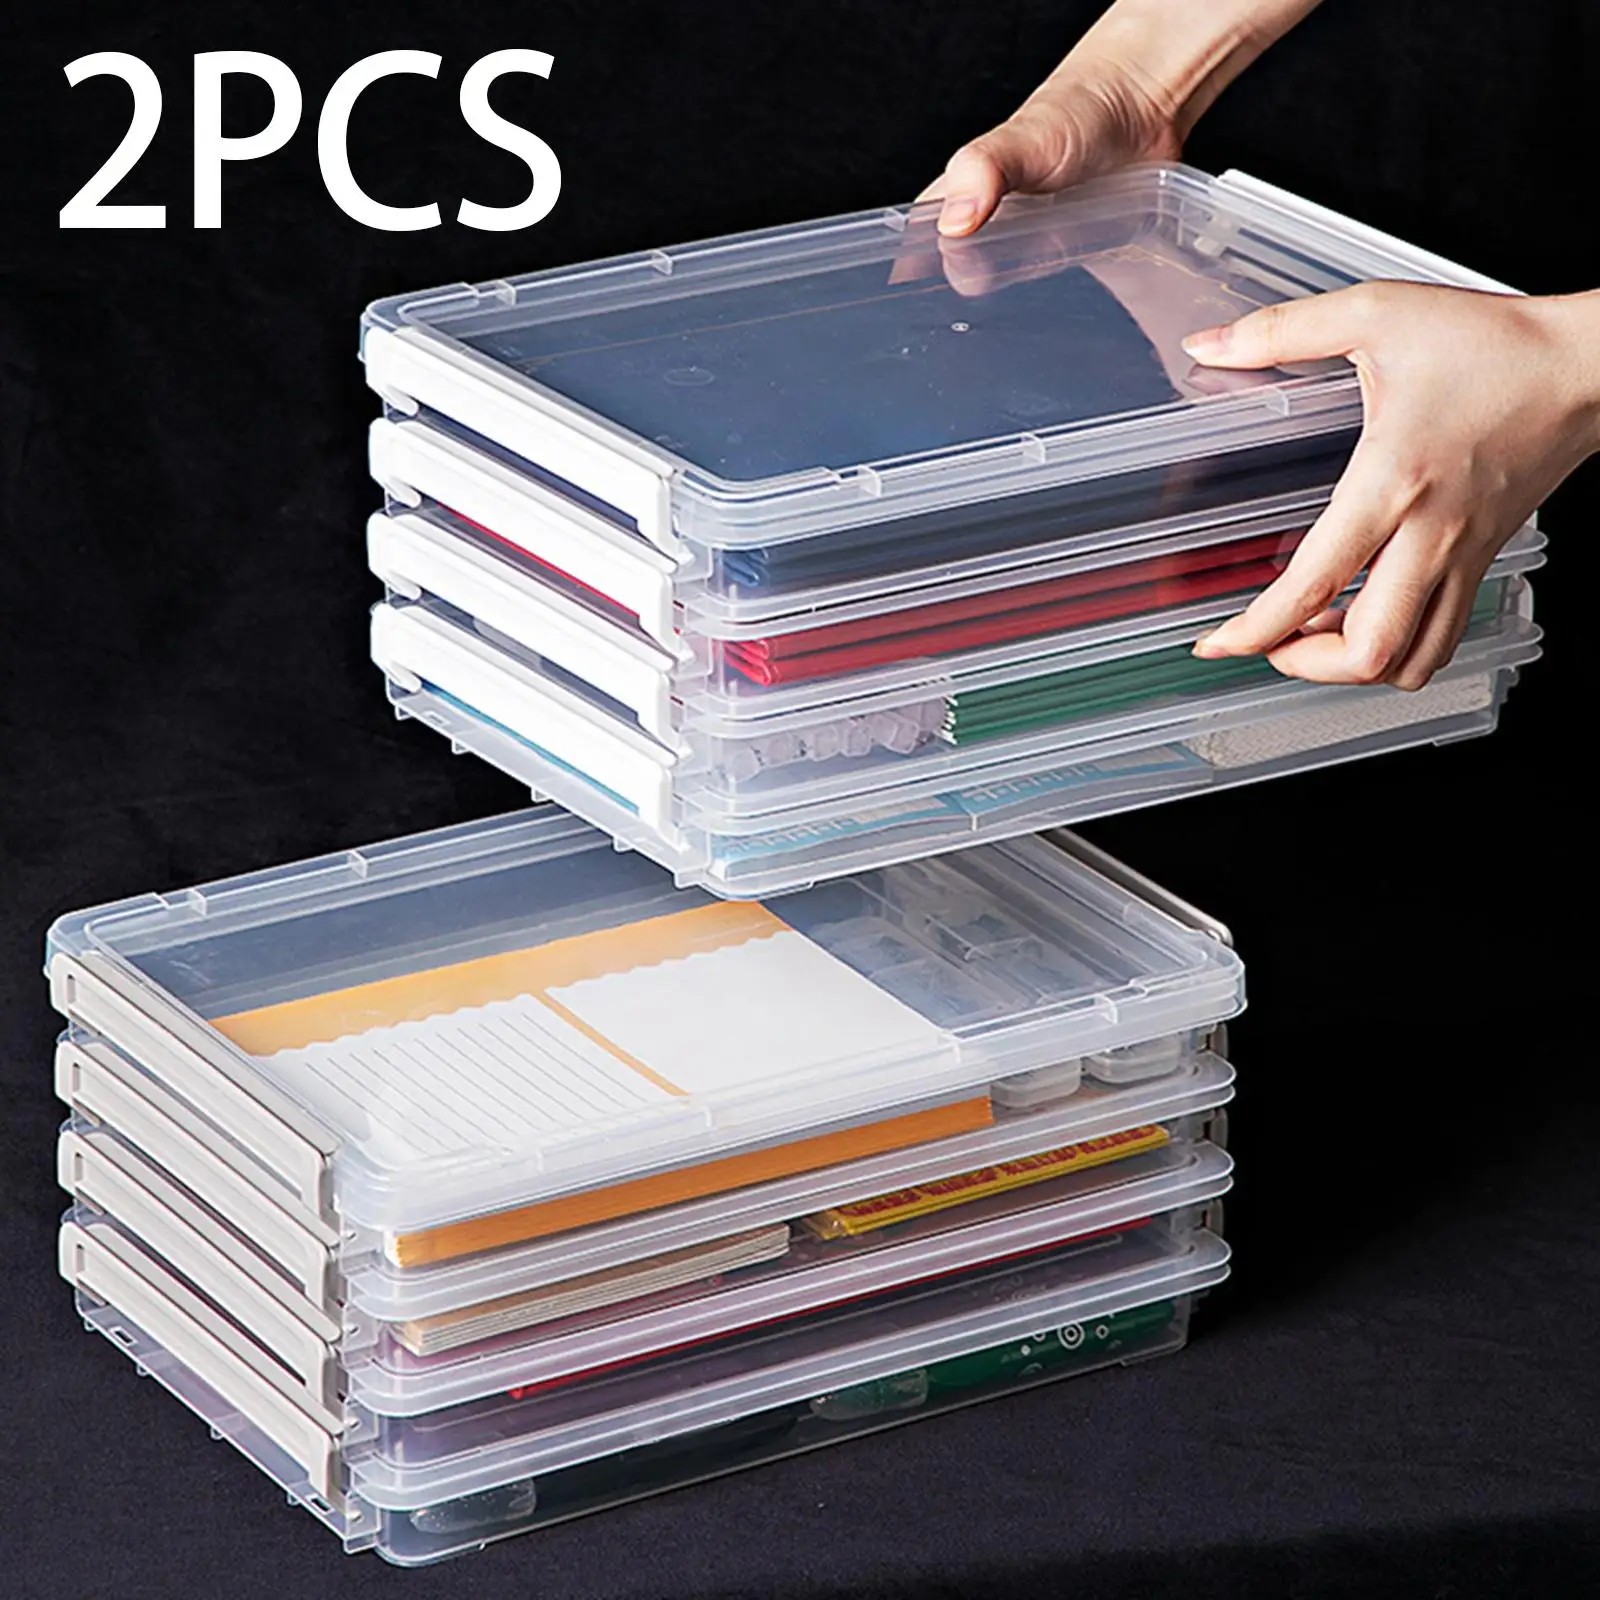 Document Holders Stackable Magazine Storage Box Letter files Storage Box Desk Paper Organizer for Home Desk Accessory Commercial